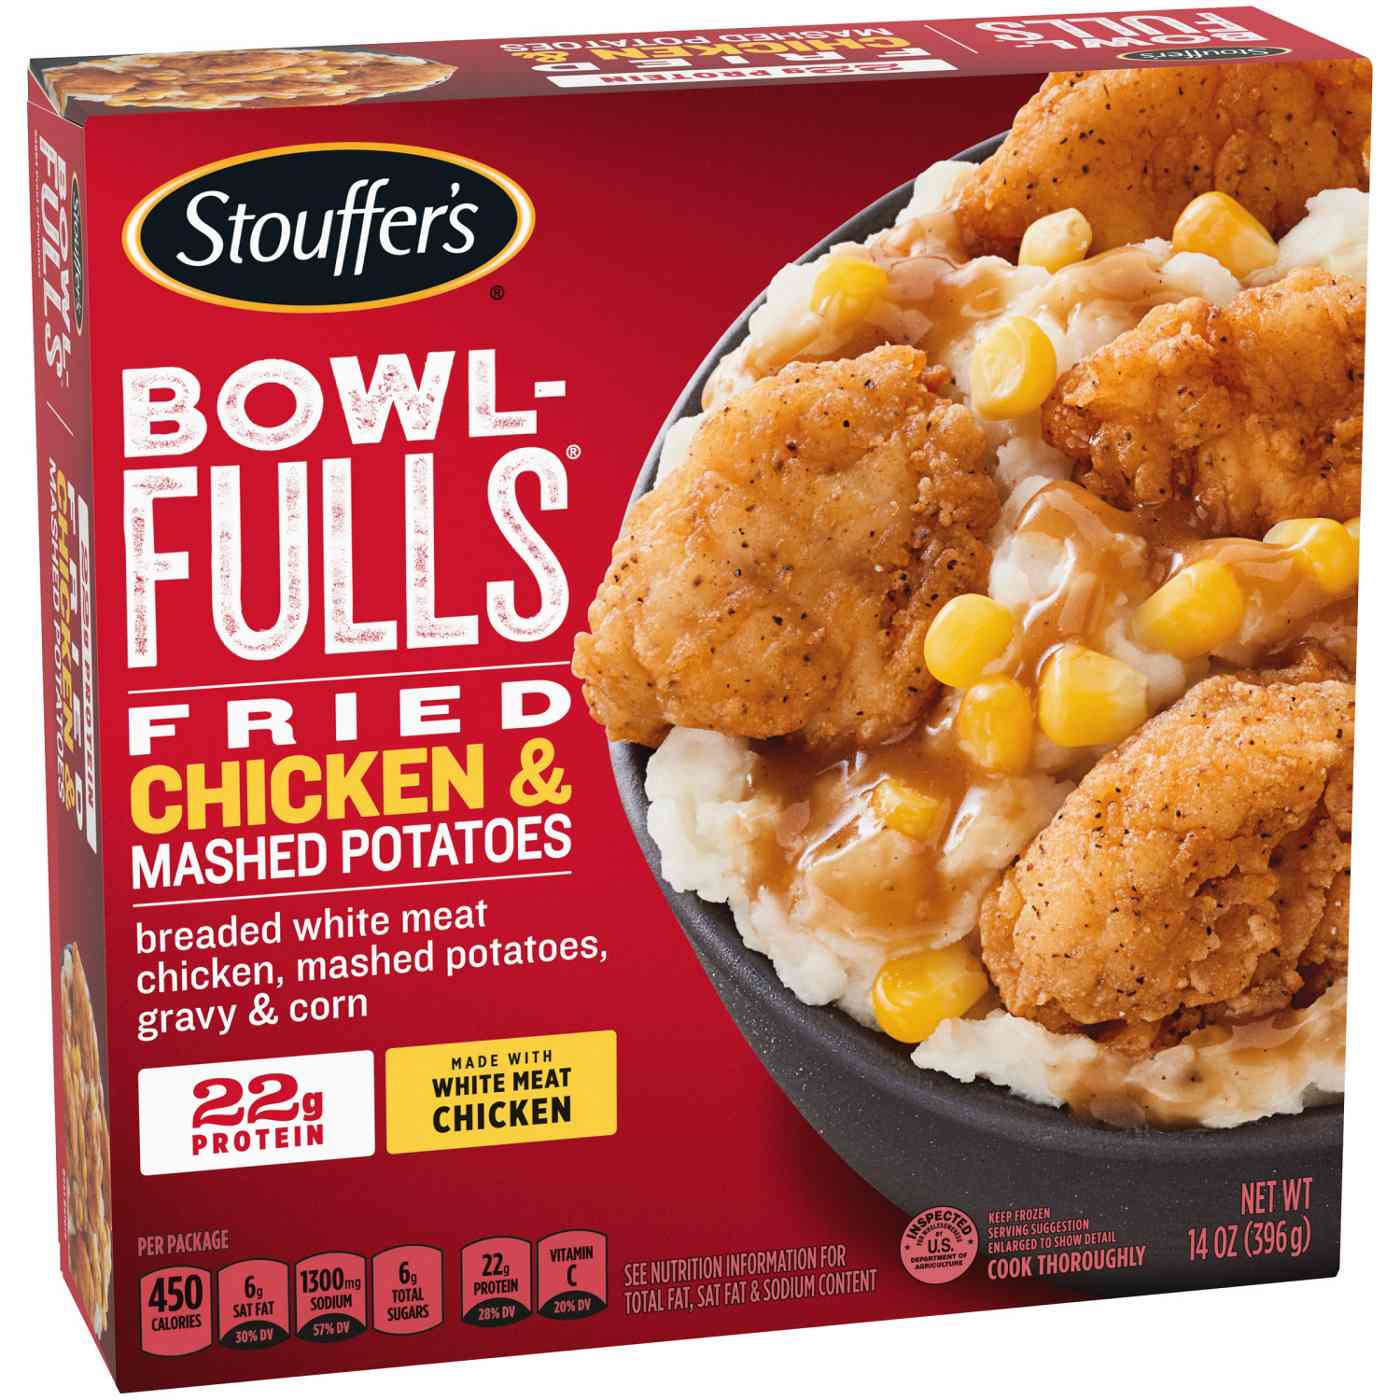 Stouffer's Bowl-Fulls Fried Chicken & Mashed Potatoes Frozen Meal; image 6 of 7